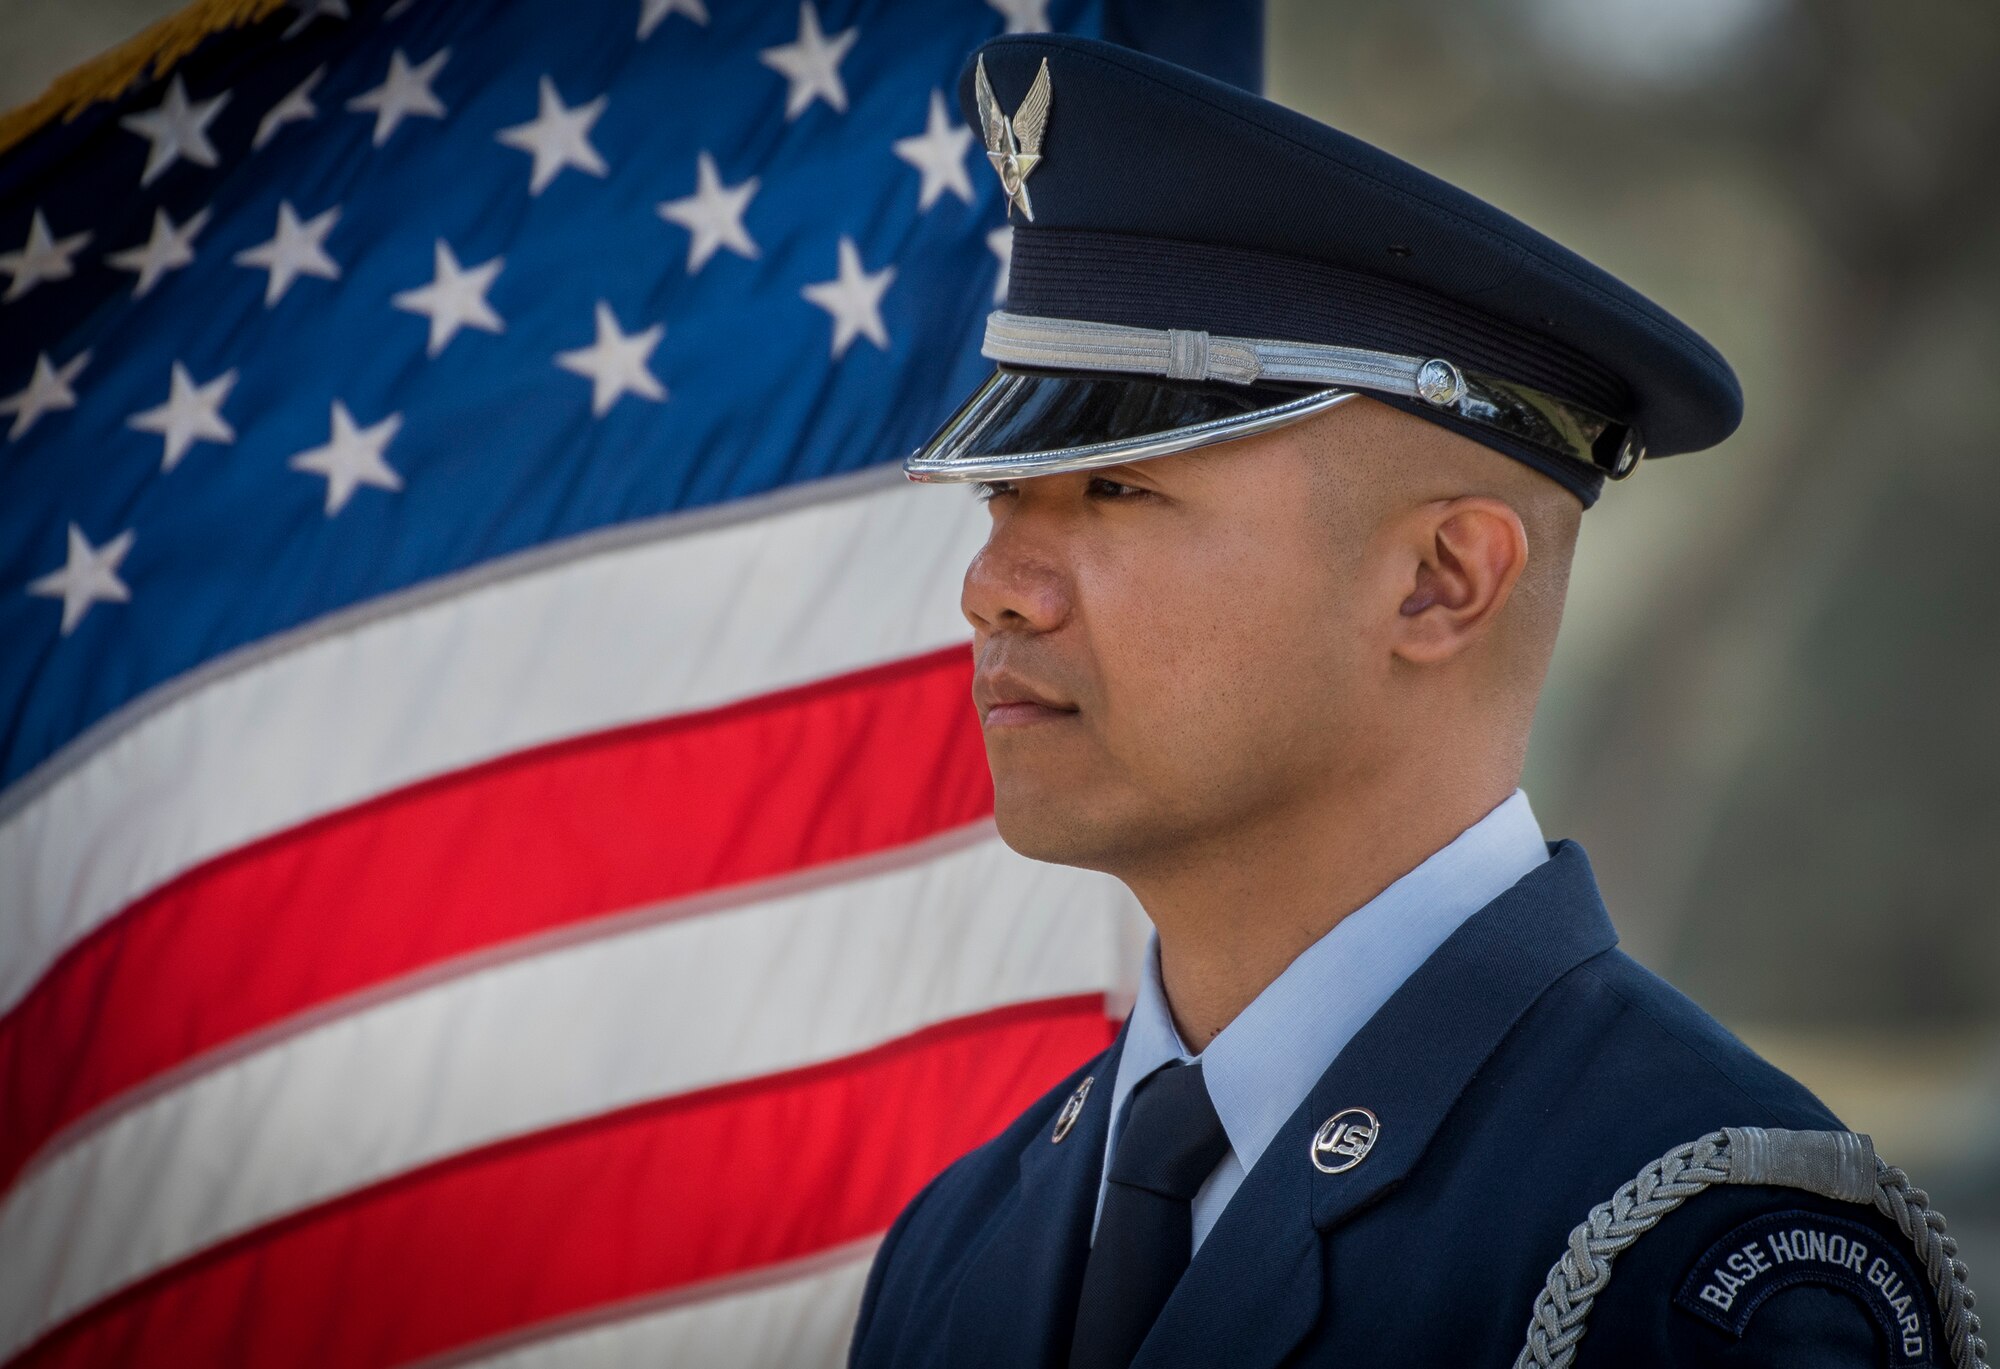 Senior Airman Jarrish Toledo, 96th Inpatient Operations Squadron, stands at parade rest prior to the honor guard graduation ceremony March 1, 2018, at Eglin Air Force Base, Fla. Approximately 13 new Airmen graduated from the 120-plus-hour course. The graduation performance includes flag detail, rifle volley, pall bearers and bugler for friends, family and unit commanders. (U.S. Air Force photo by Samuel King Jr.)